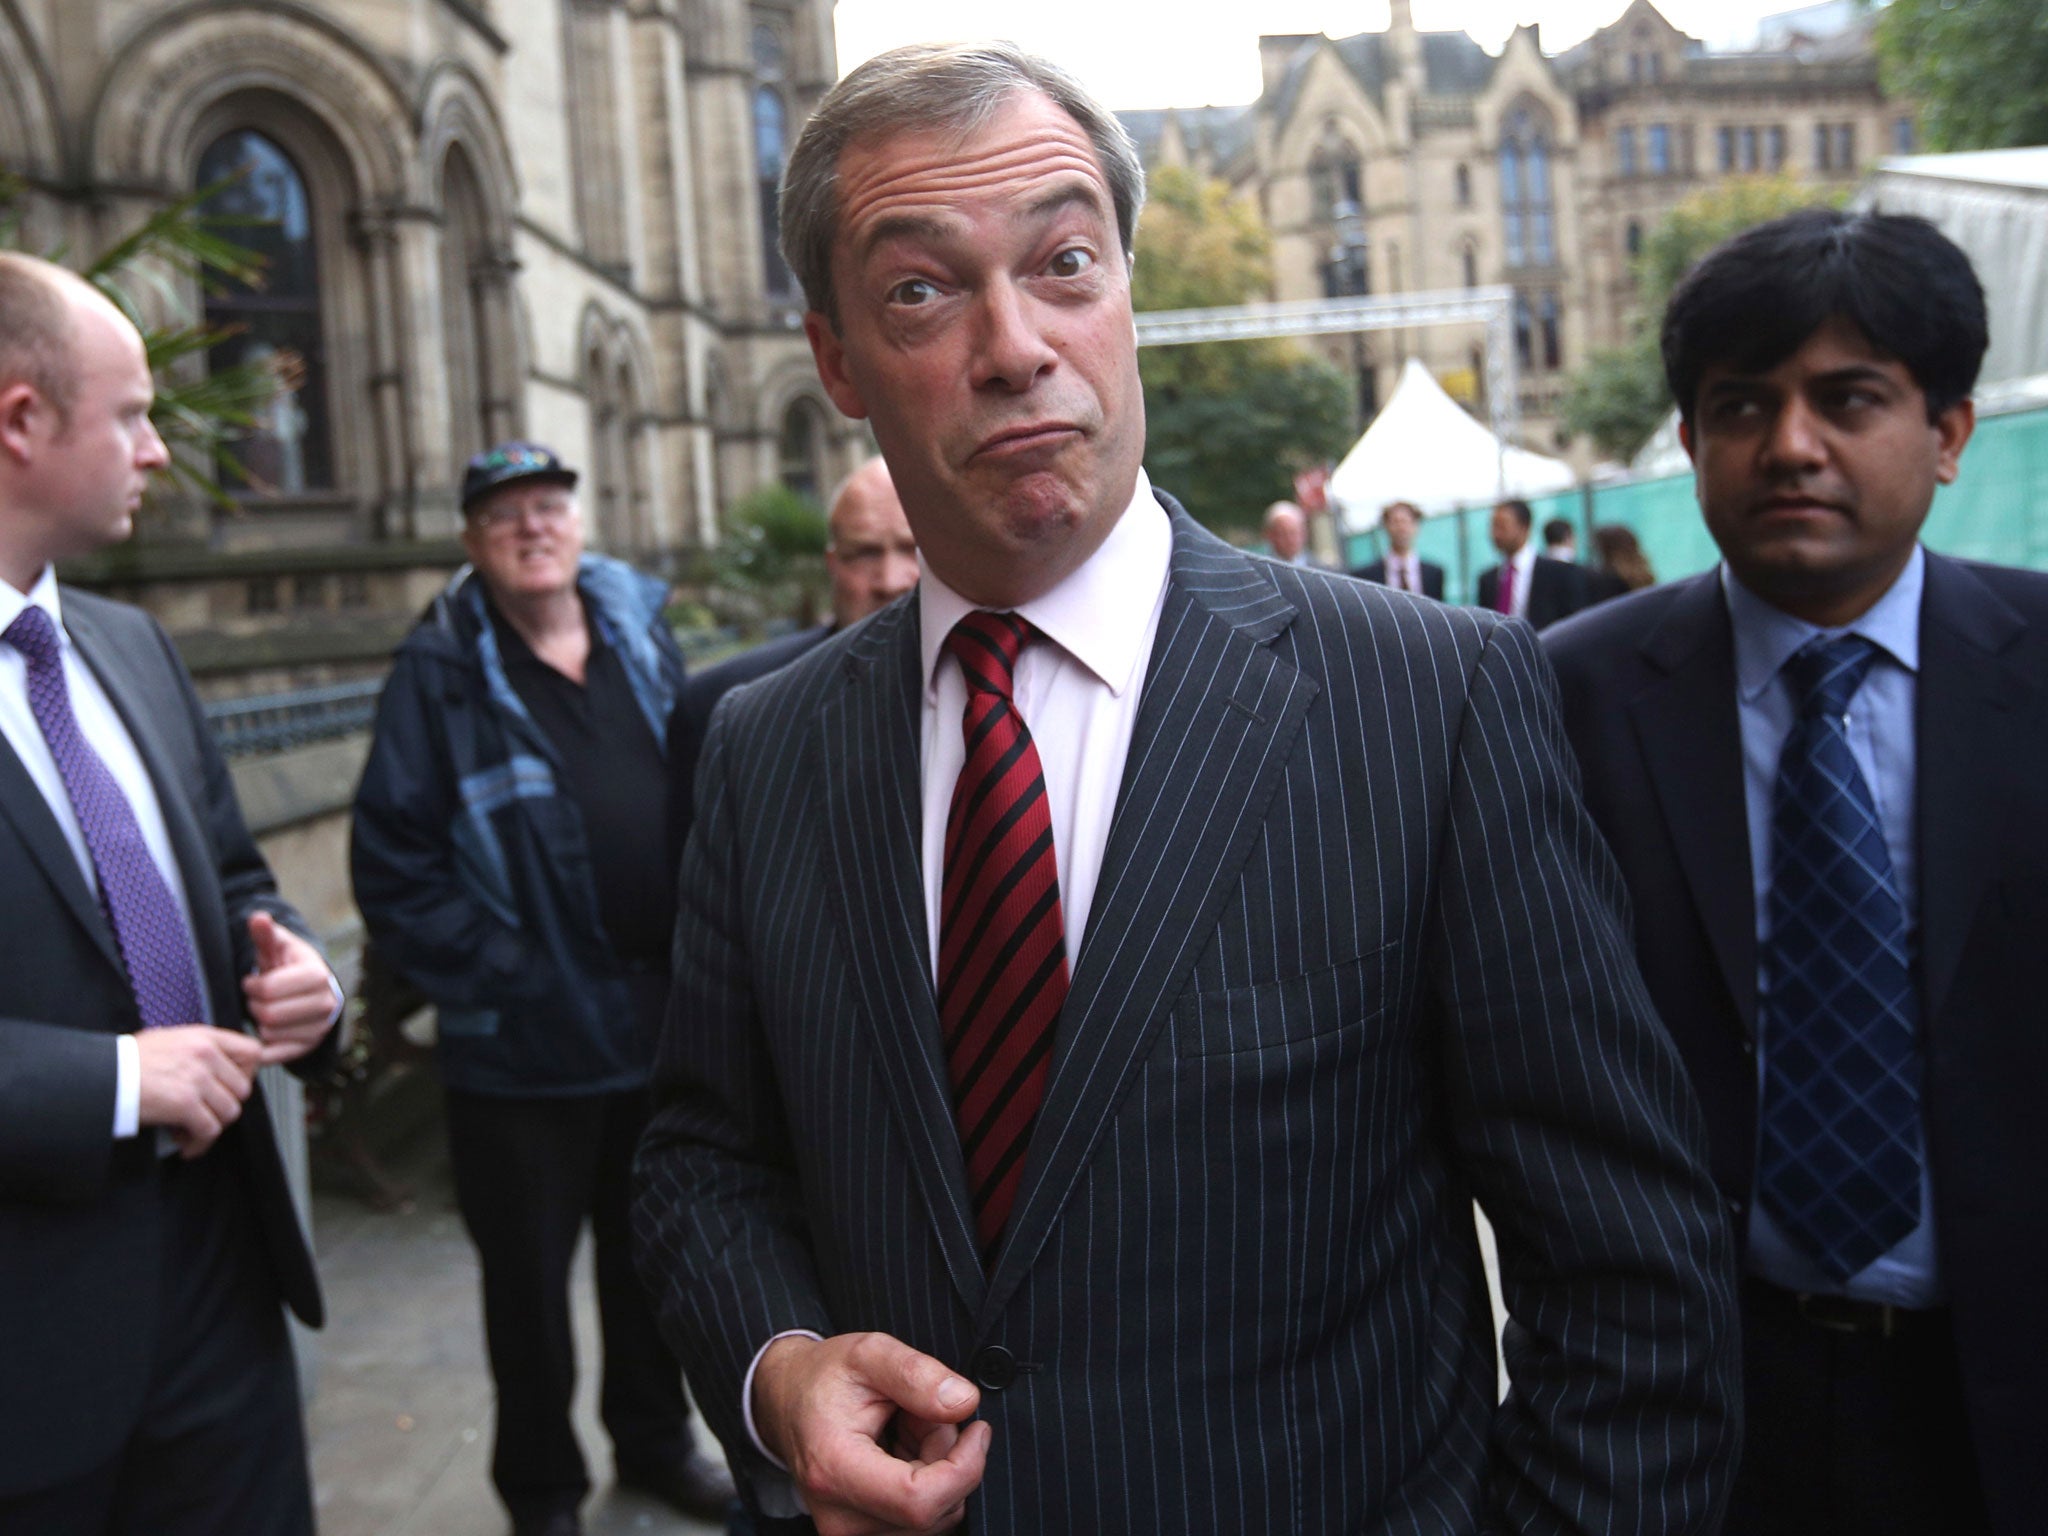 Nigel Farage (C), the leader of the UK Independence Party